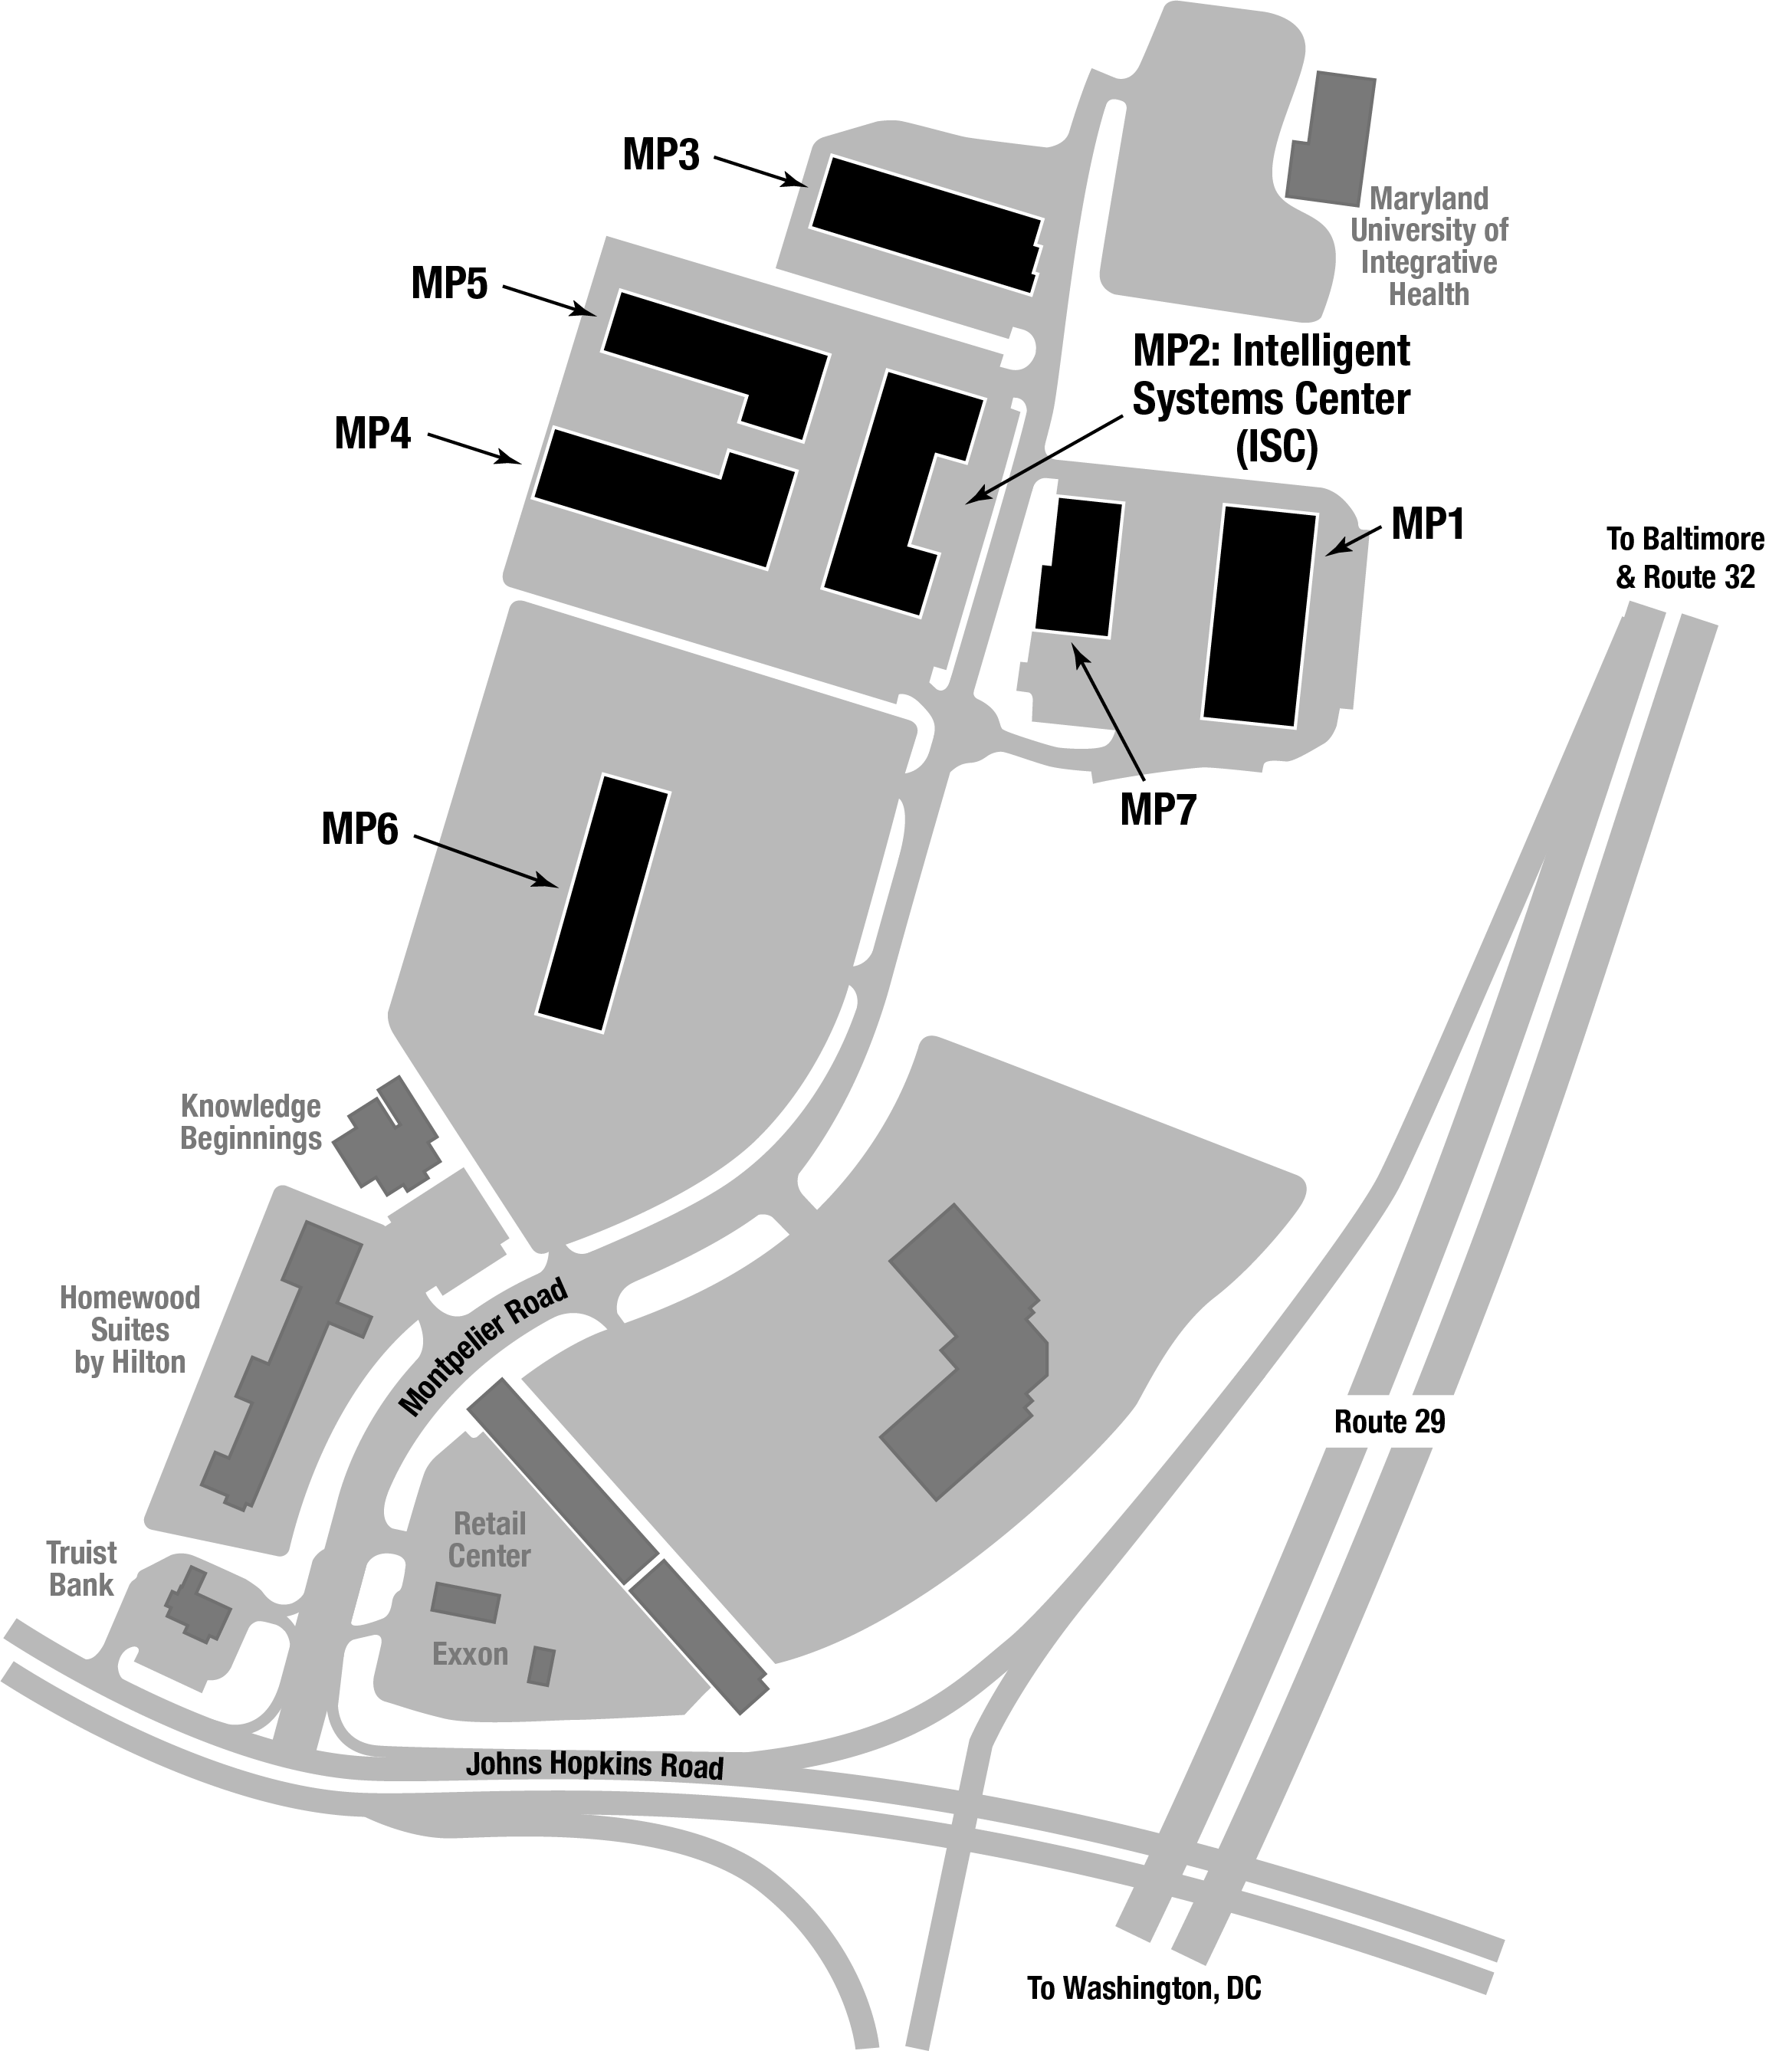 Map of Johns Hopkins APL’s Montpelier campus in Laurel, Maryland. The campus is located on Montpelier Road.